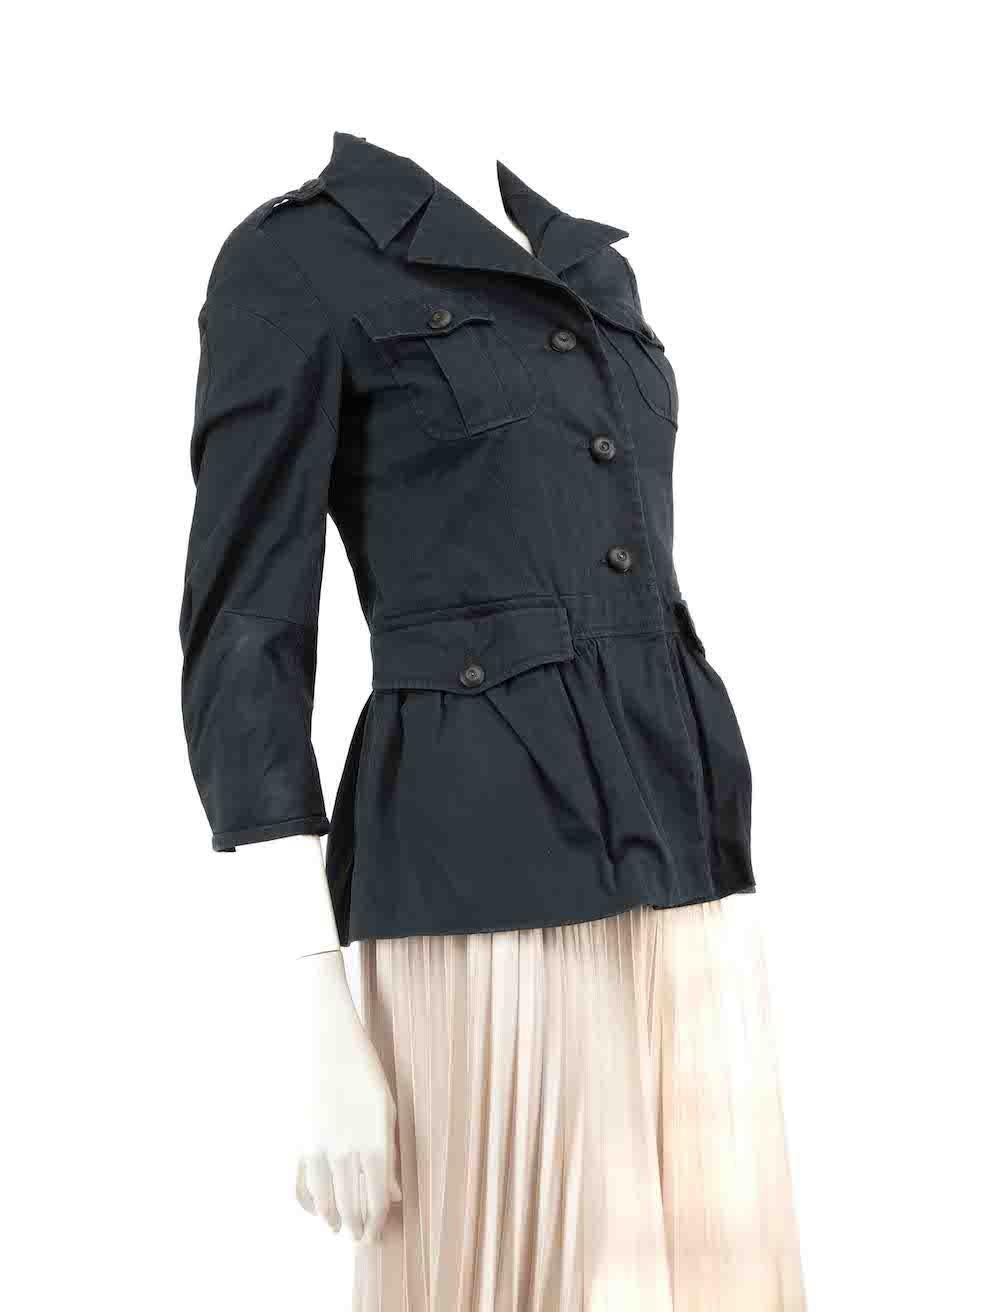 CONDITION is Very good. Minimal wear to jacket is evident. Minimal wear to the right side where there are marks near the cuffs on this used Miu Miu designer resale item.
 
 
 
 Details
 
 
 Navy
 
 Cotton
 
 Utility jacket
 
 Button up fastening
 
